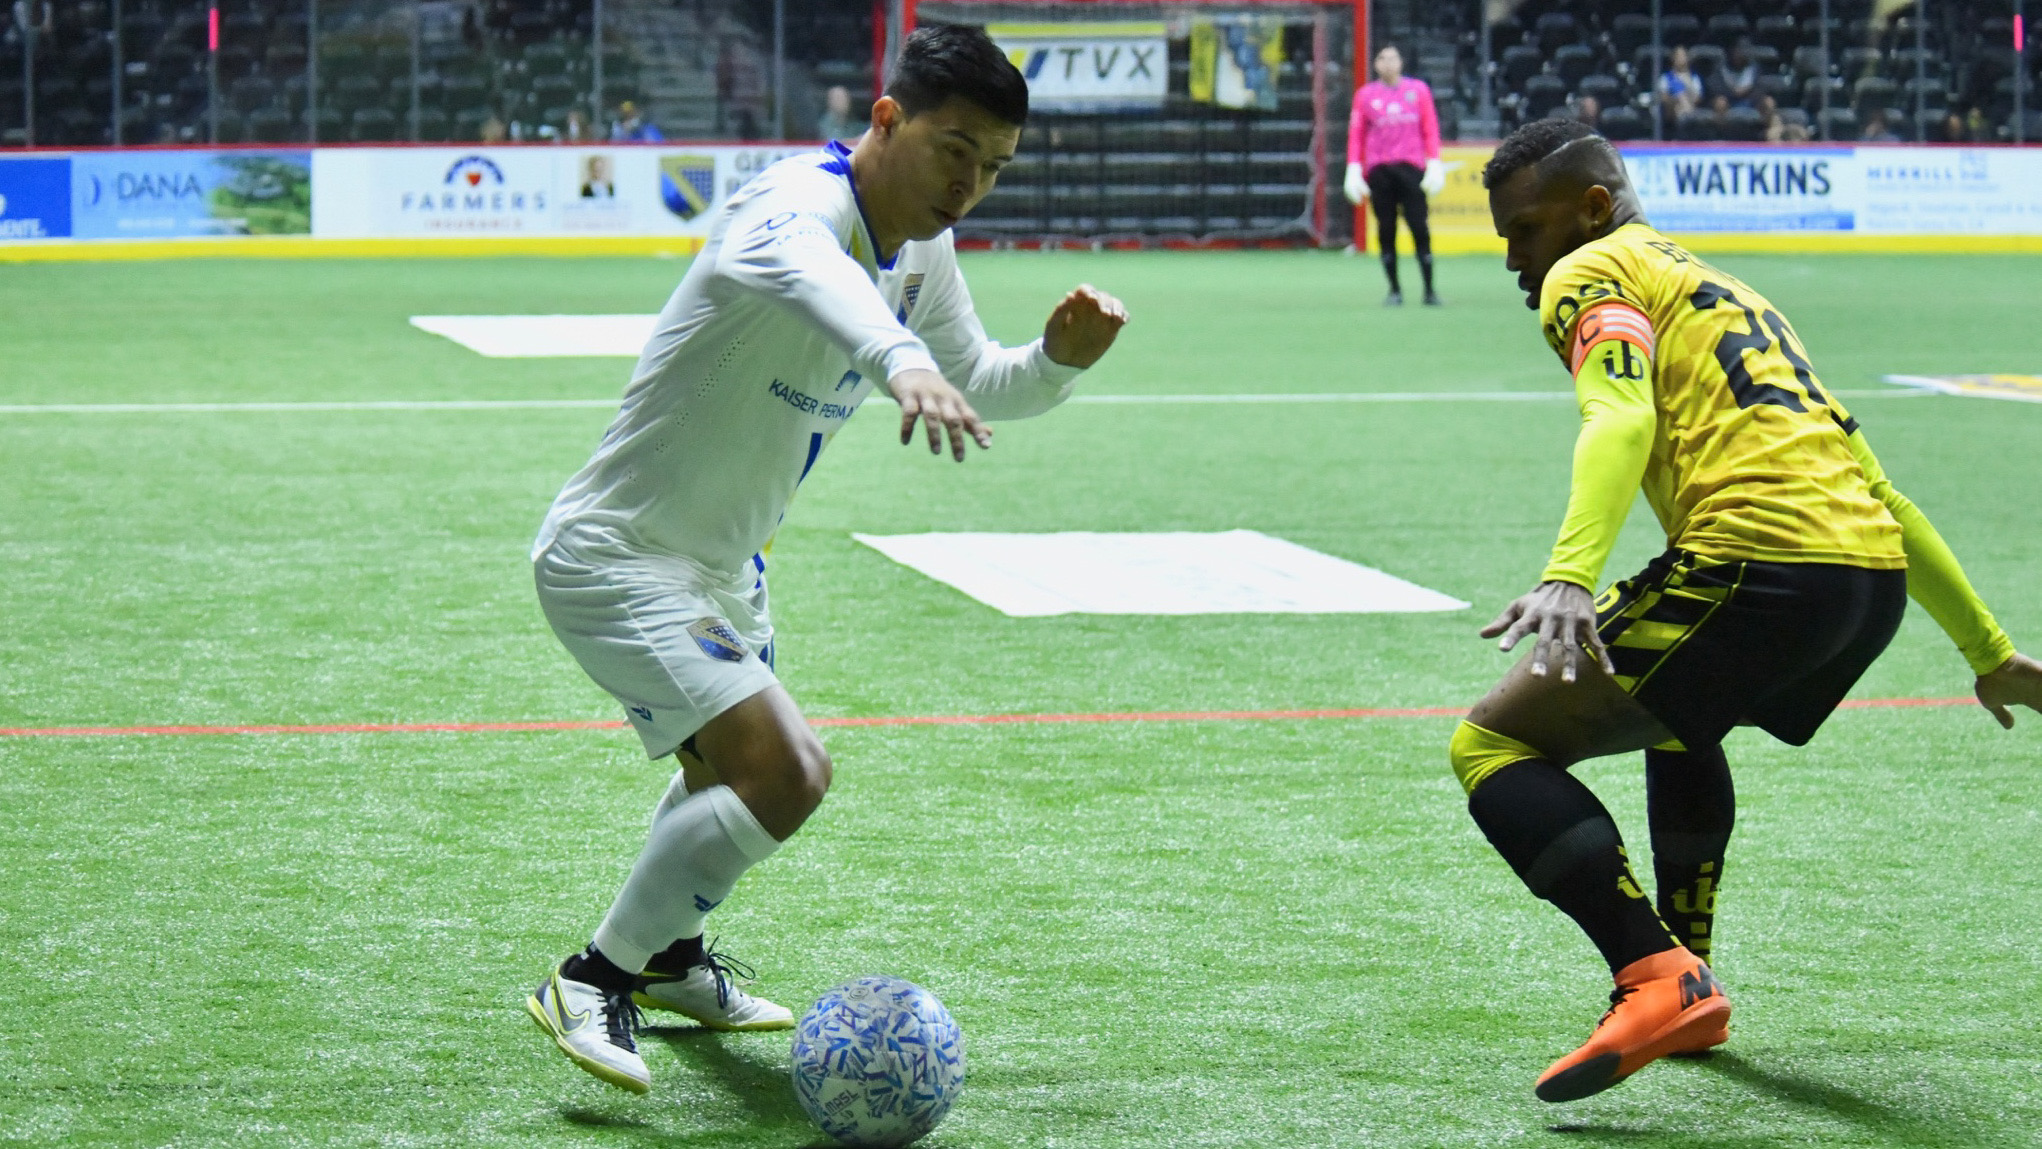 San Diego Sockers face the Baltimore Blast in Towson, Md. 